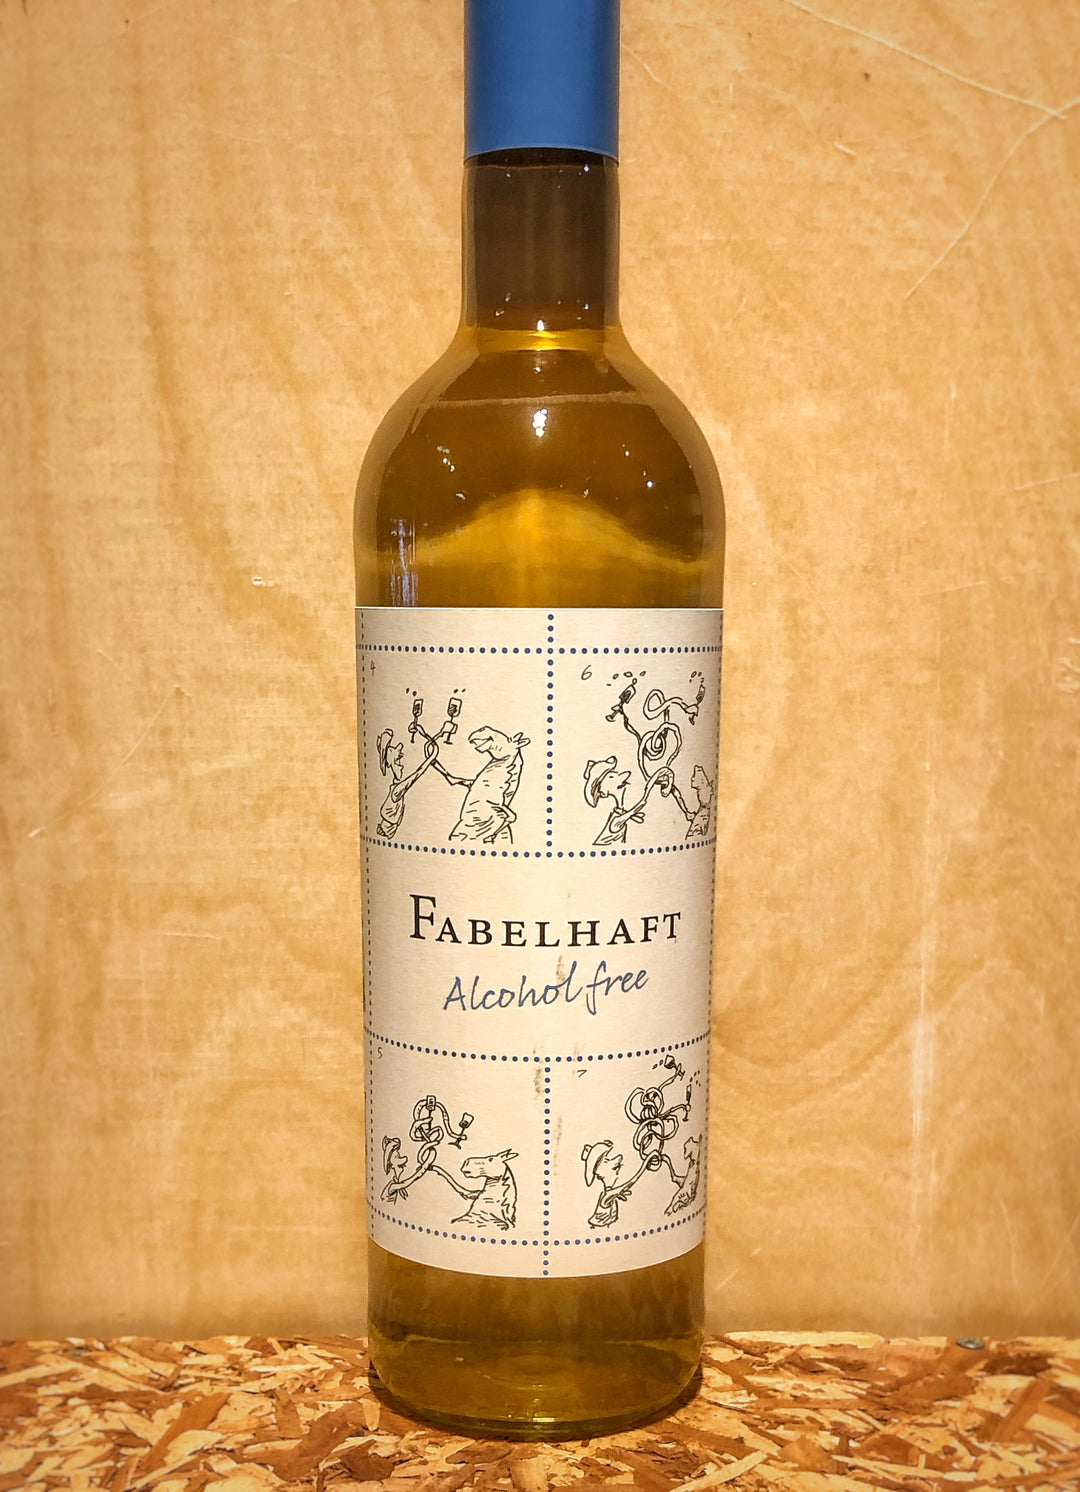 Fio 'Fabelhaft' Non-Alcoholic Riesling (Mosel, Germany)